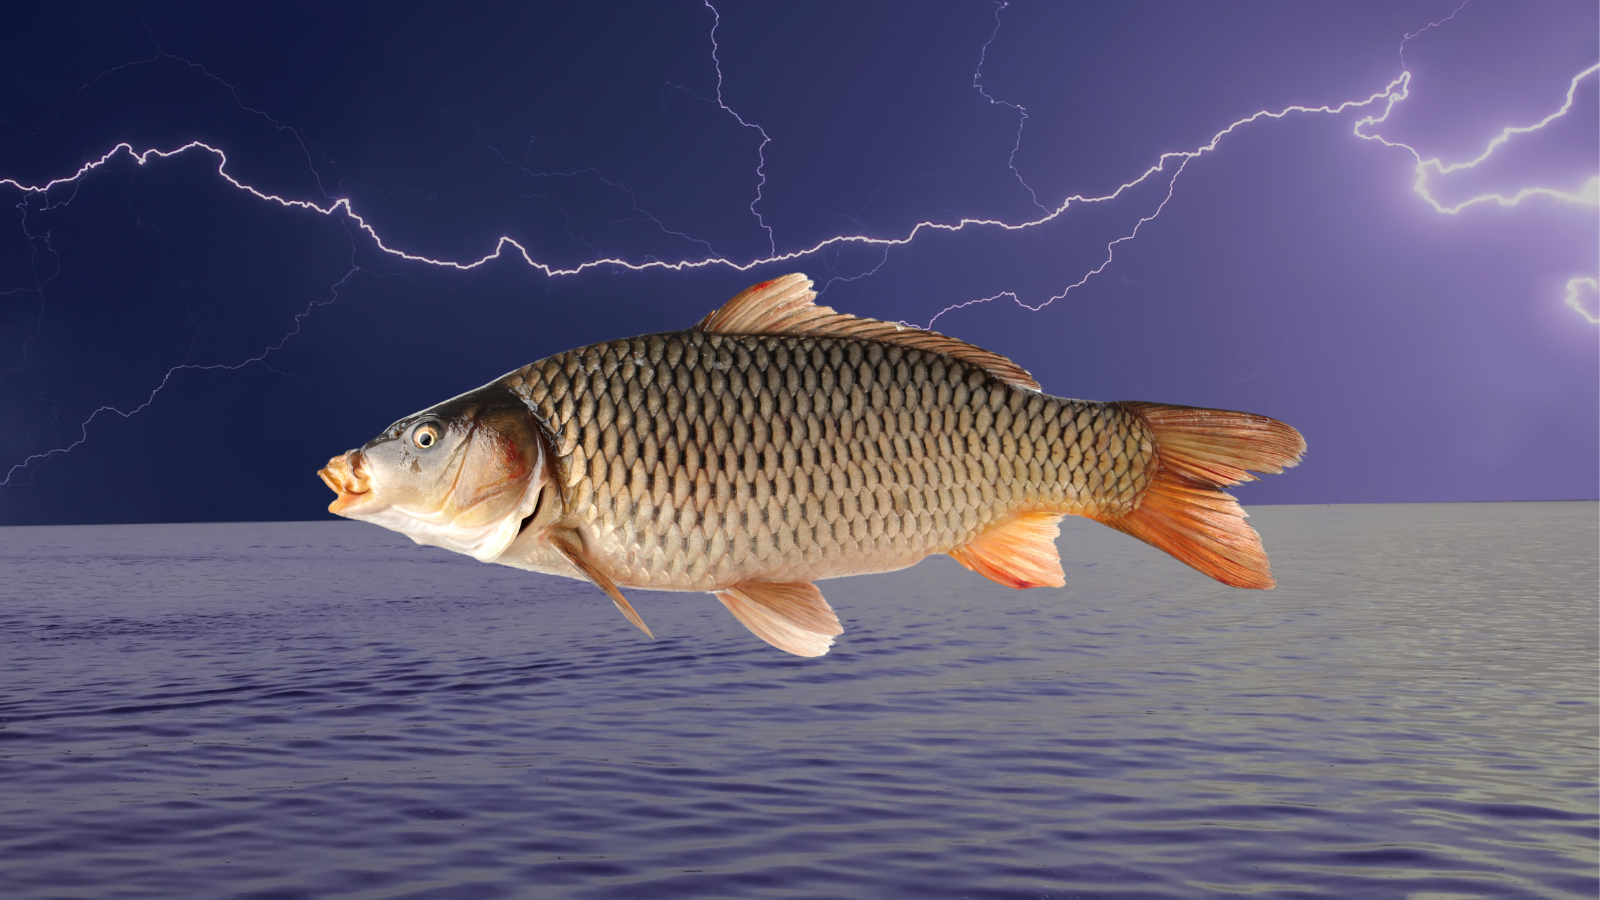 Why the Army Corps of Engineers is electrocuting invasive fish